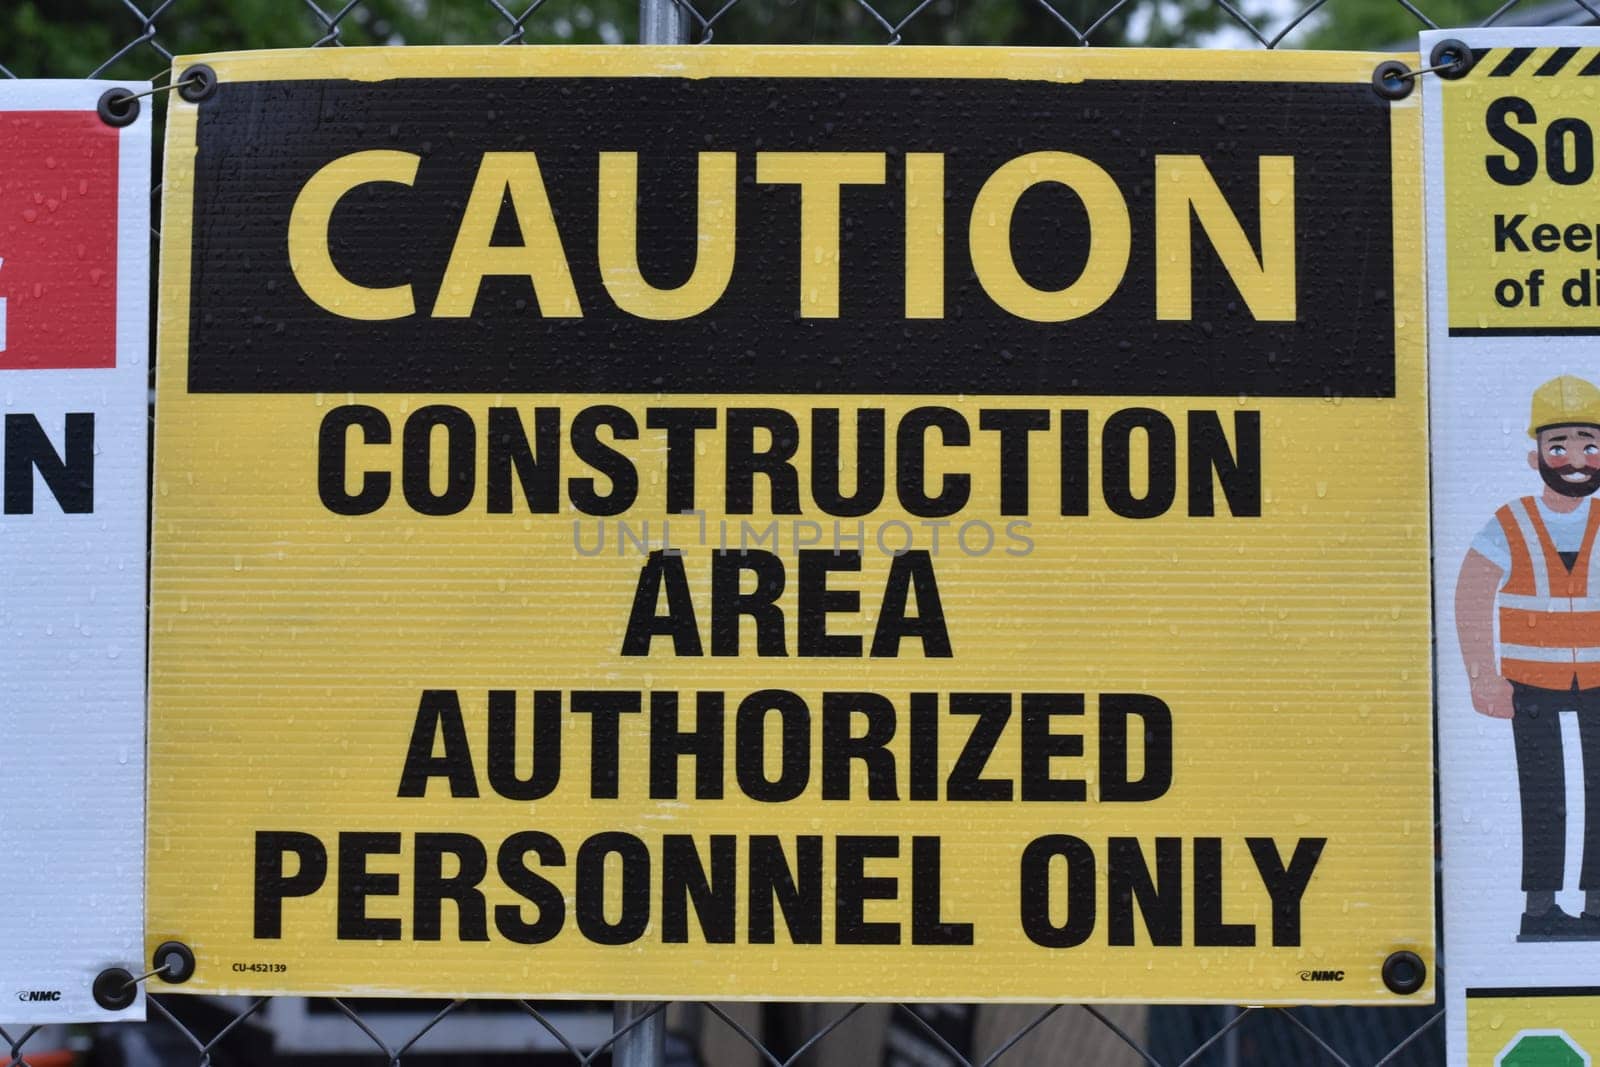 Caution Construction Area Authorized Personnel Only Sign. High quality photo